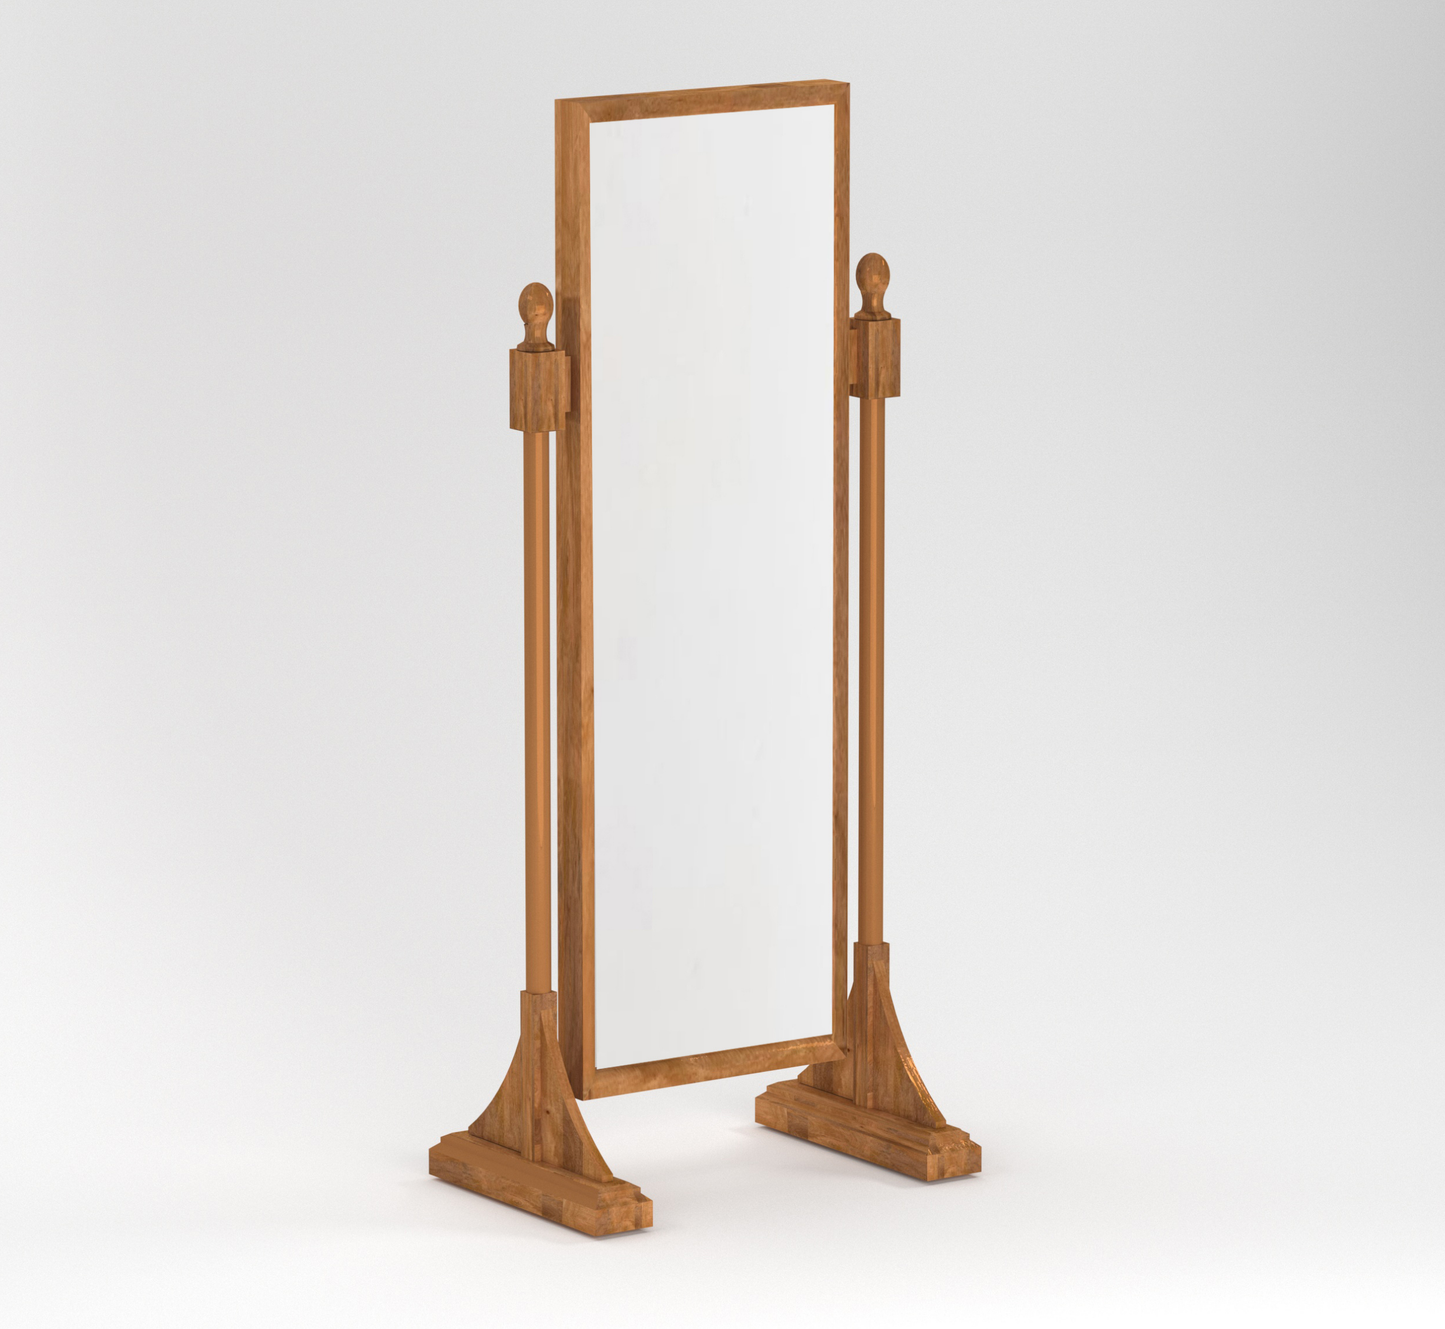 Mile 6FT Mirror with Stand